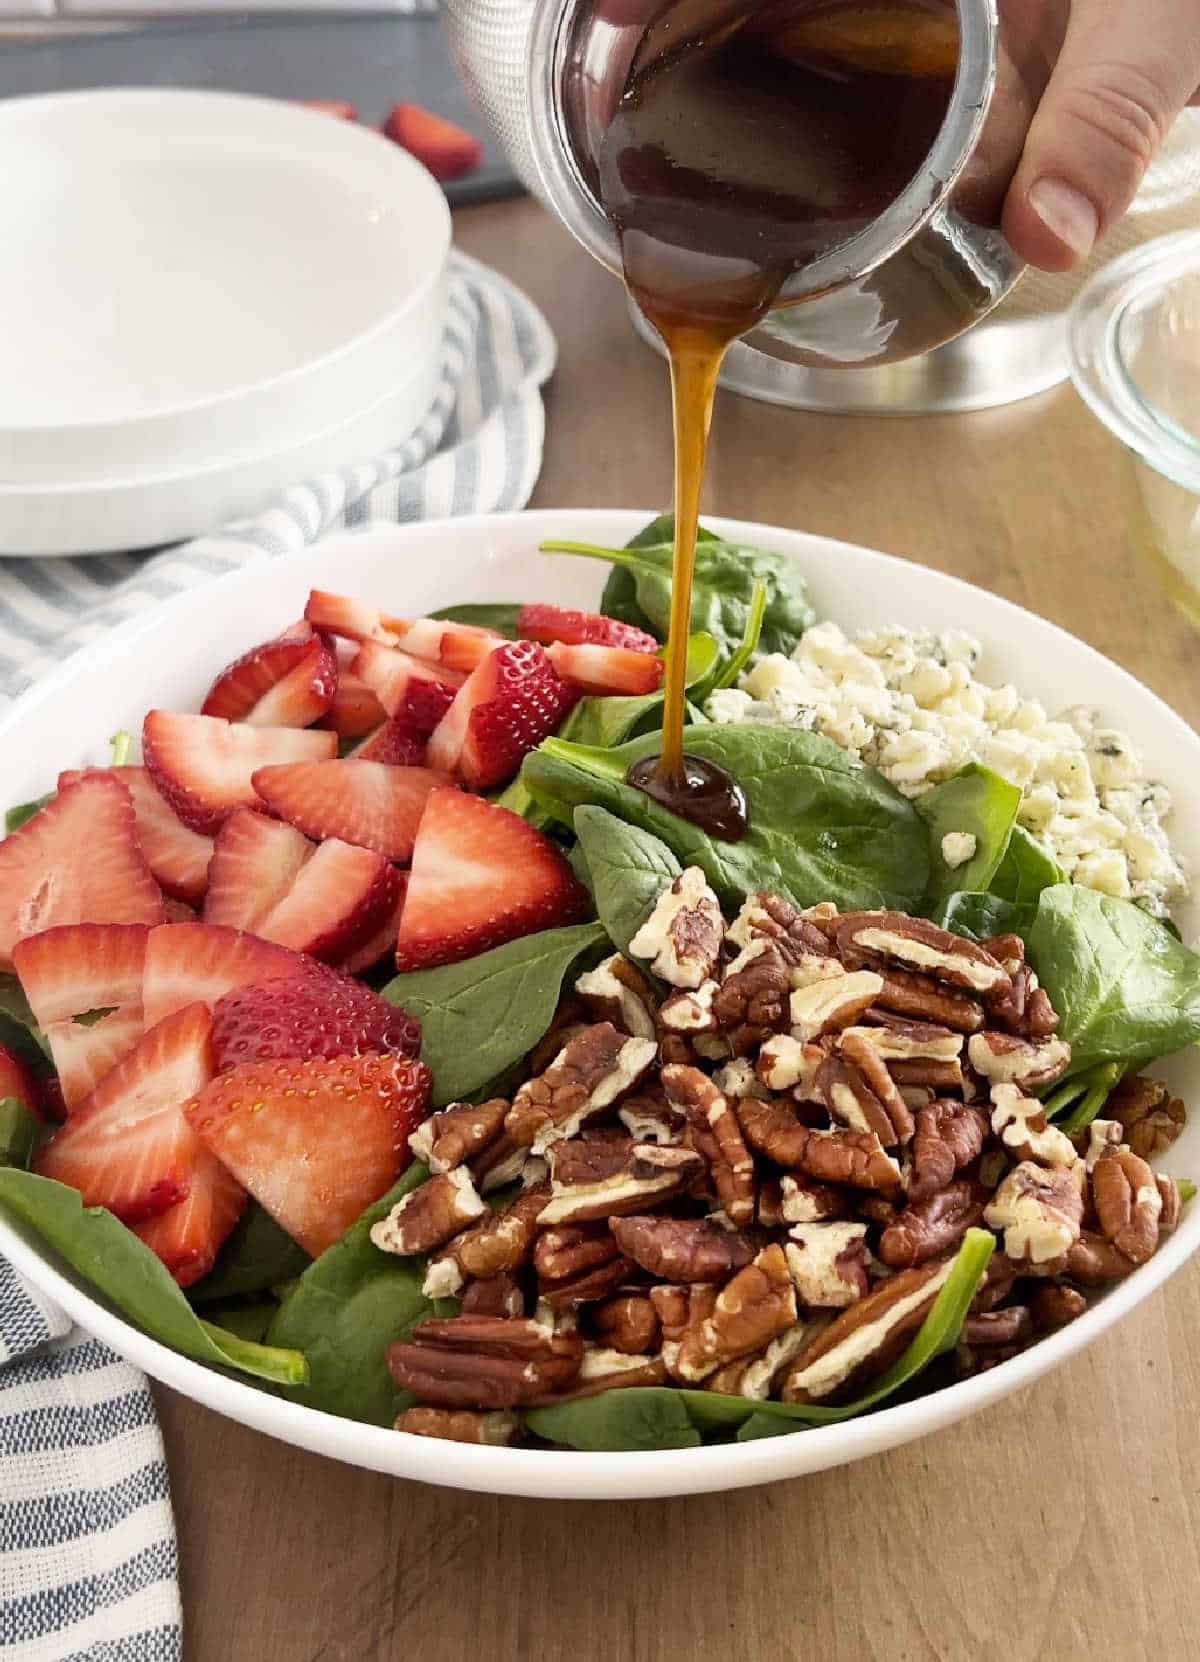 pour balsamic dressing over salad.